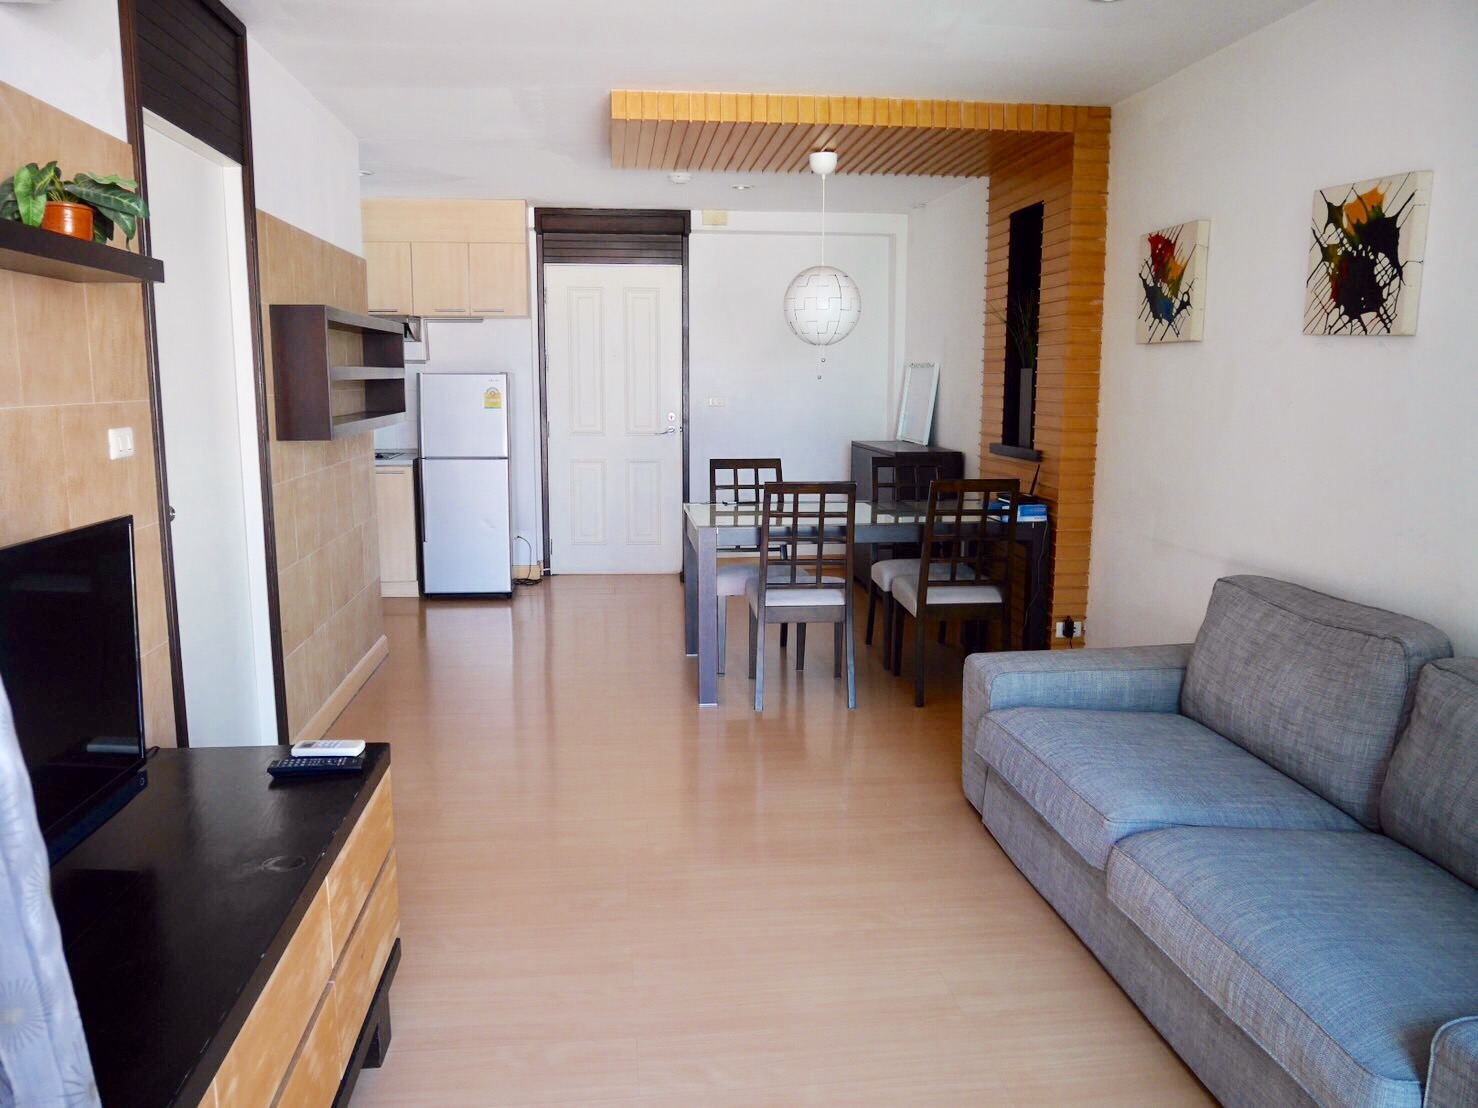 Condo for rent!! 1 bedroom 48 Sq.m Fully furnished, Ready to move in.